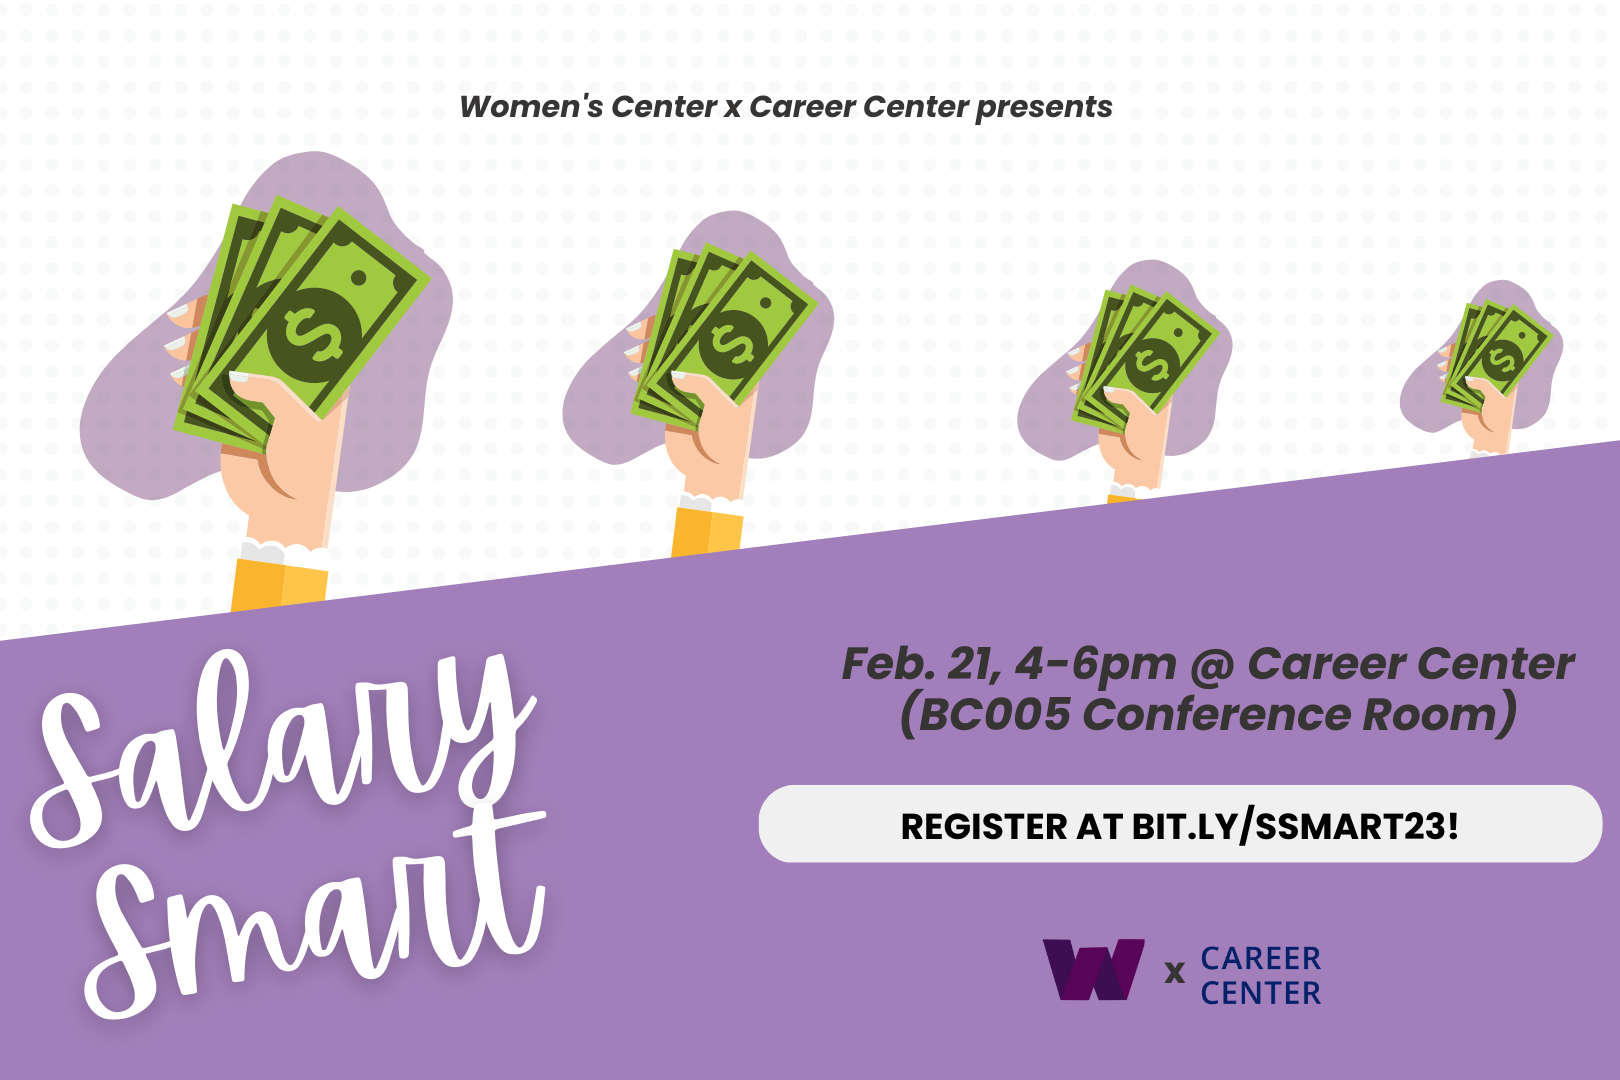 a white background with dots is cut in half by a slanted purple box, above the box is a graphic of 4 pale hands of varying sizes holding a stack of green dollars with the accompanying text "Women's Center x Career Center present"; within the purple box a stylized white font reads "Salary Smart" on the left side and black font on the right side reads "Feb. 21 4-6pm @ Career Center (BC005 Conference Room)"; below this block of text still on the right side a rounded white box contains more black text reading 